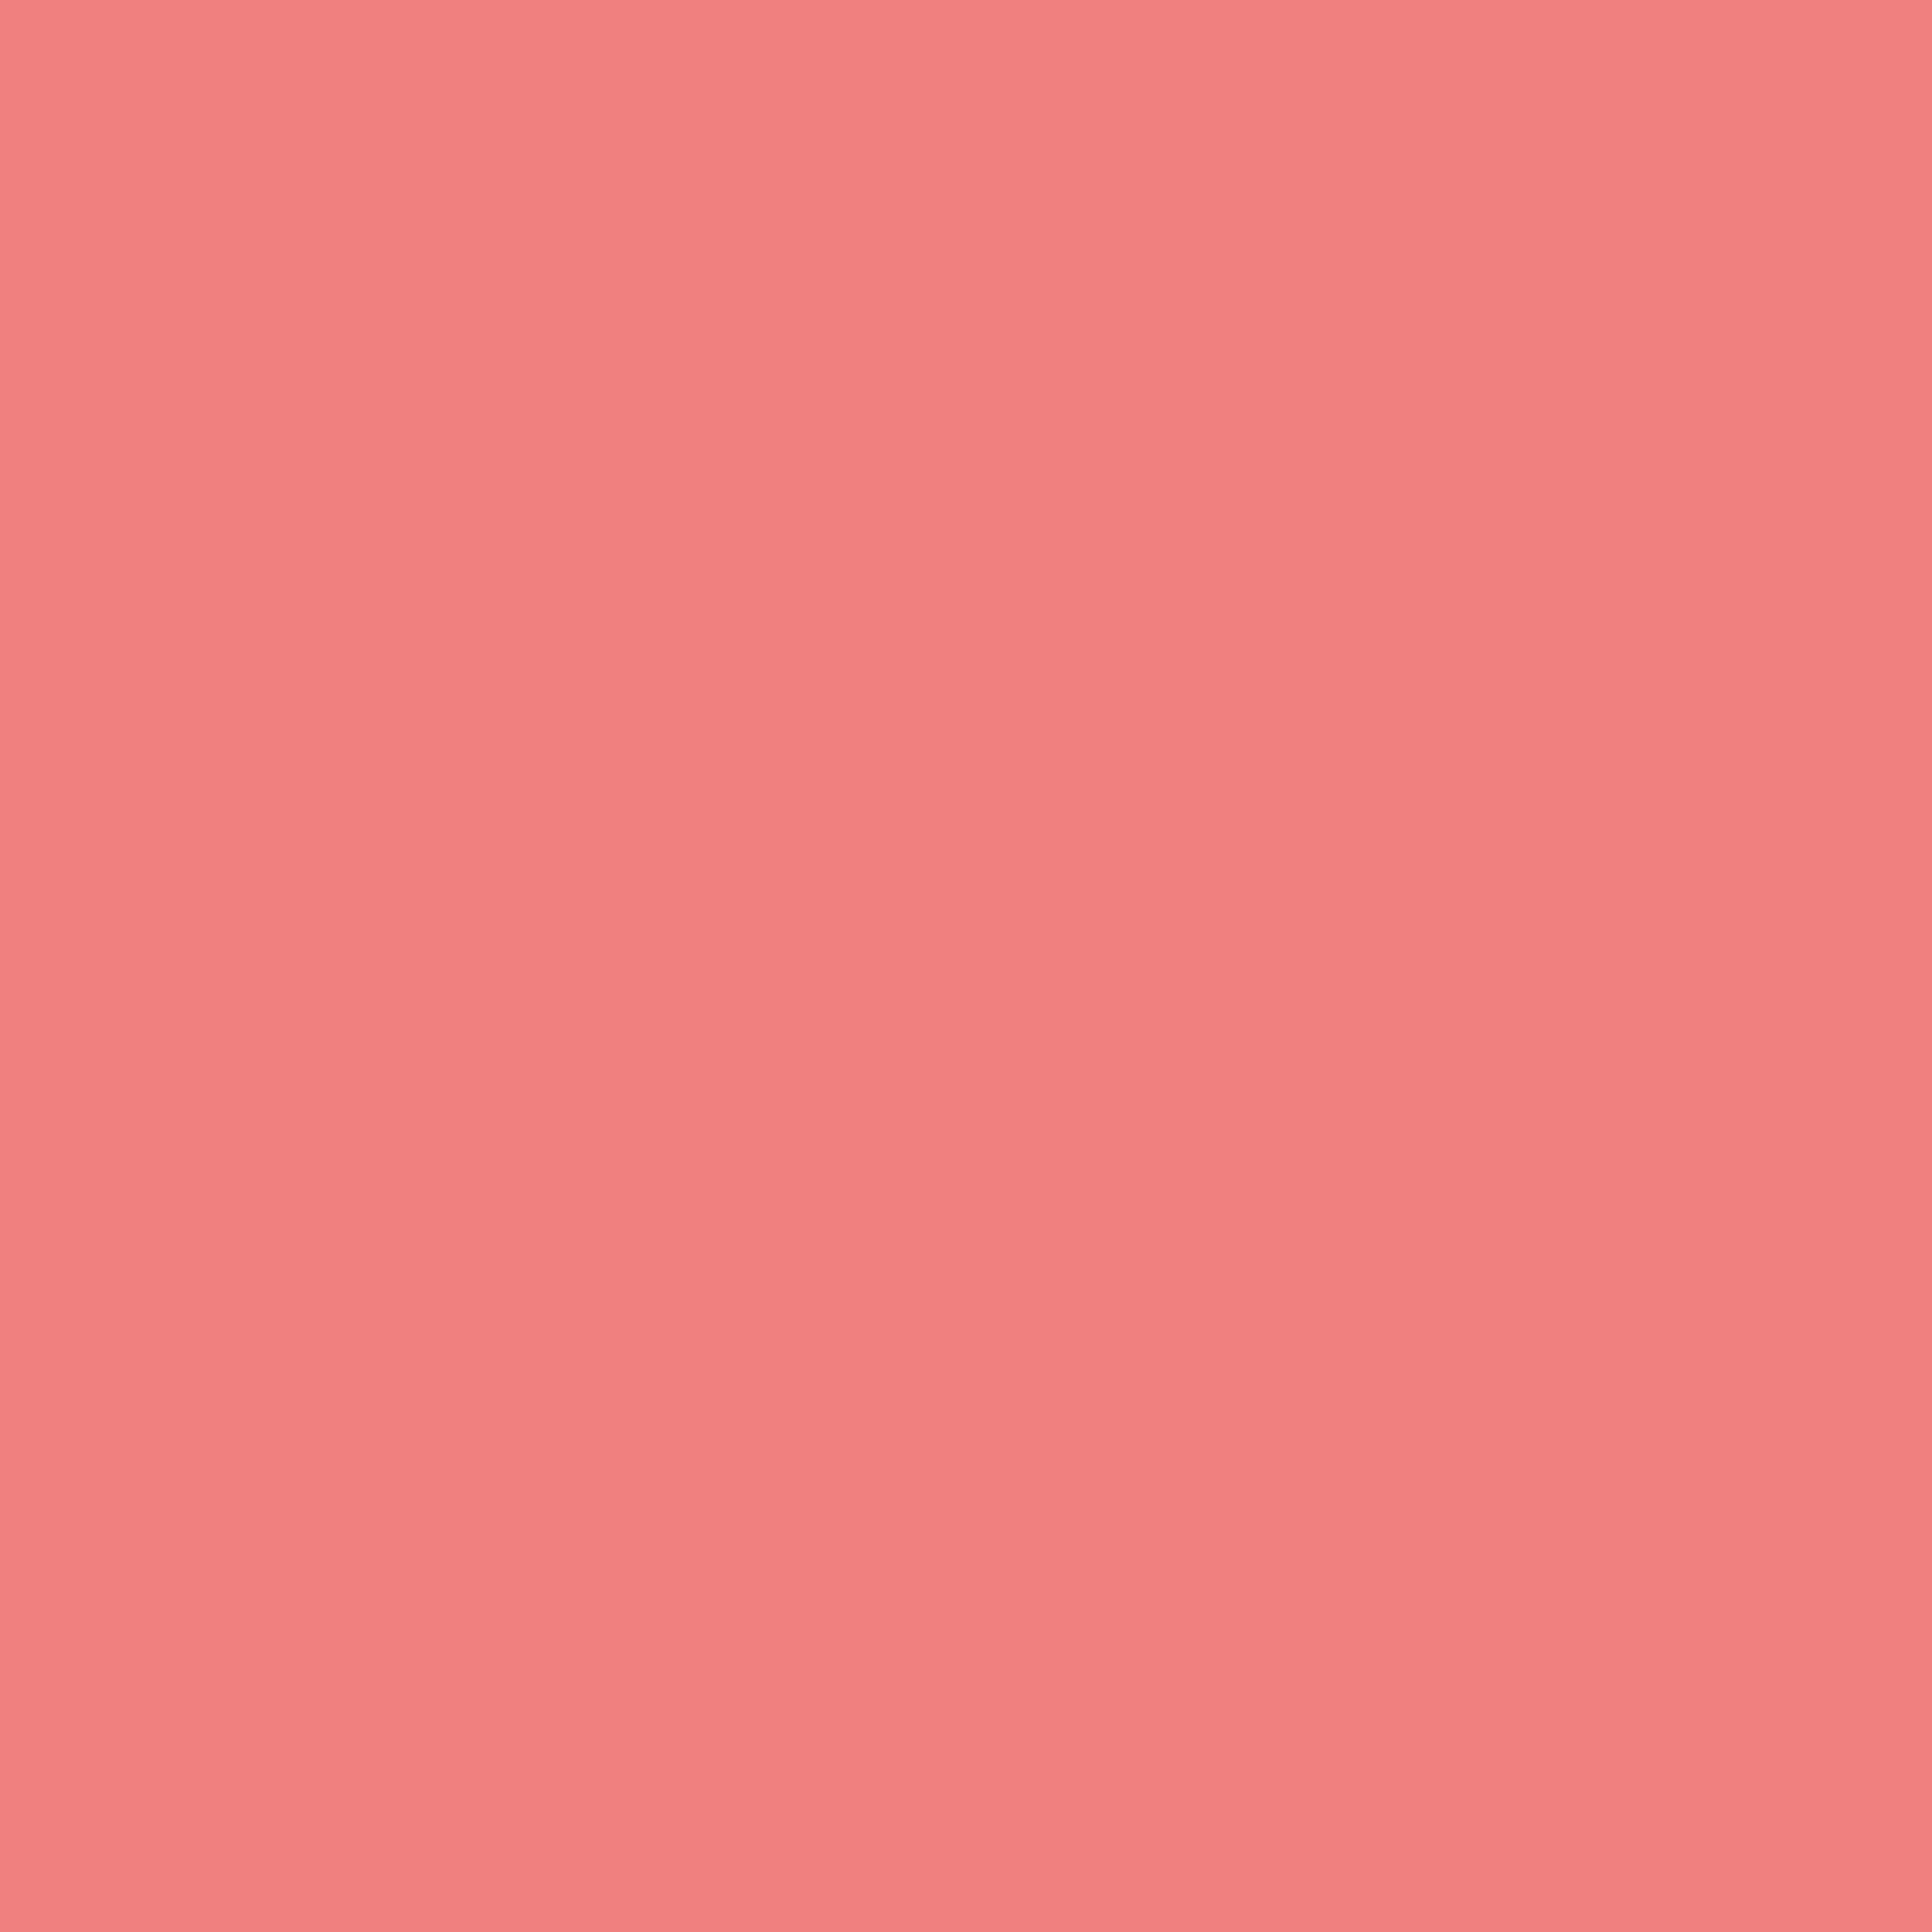 2732x2732 Light Coral Solid Color Background